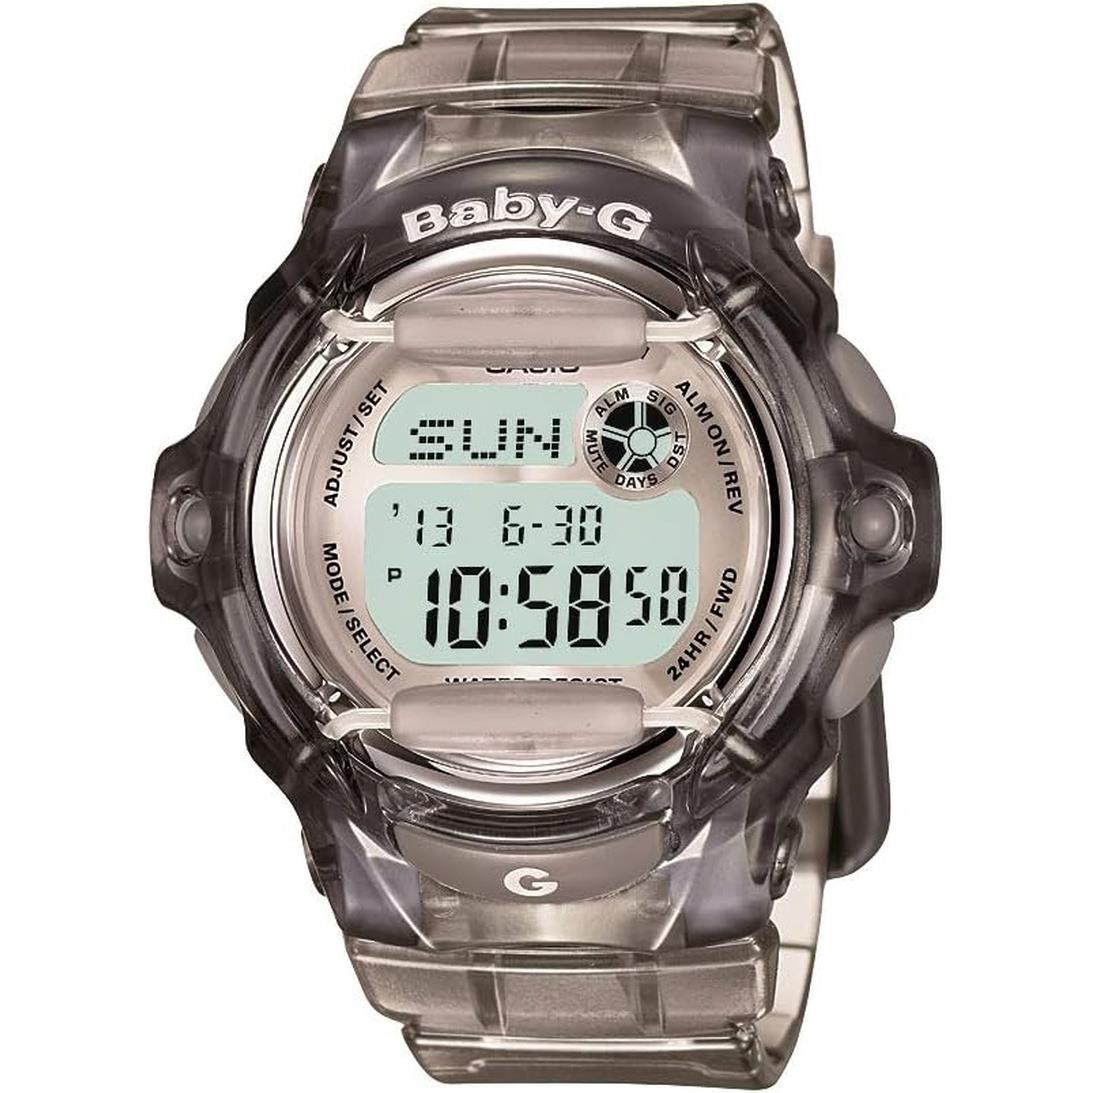 Casio Women`s Baby G Quartz Illuminated Watch with Resin Strap Colors Choices Gray